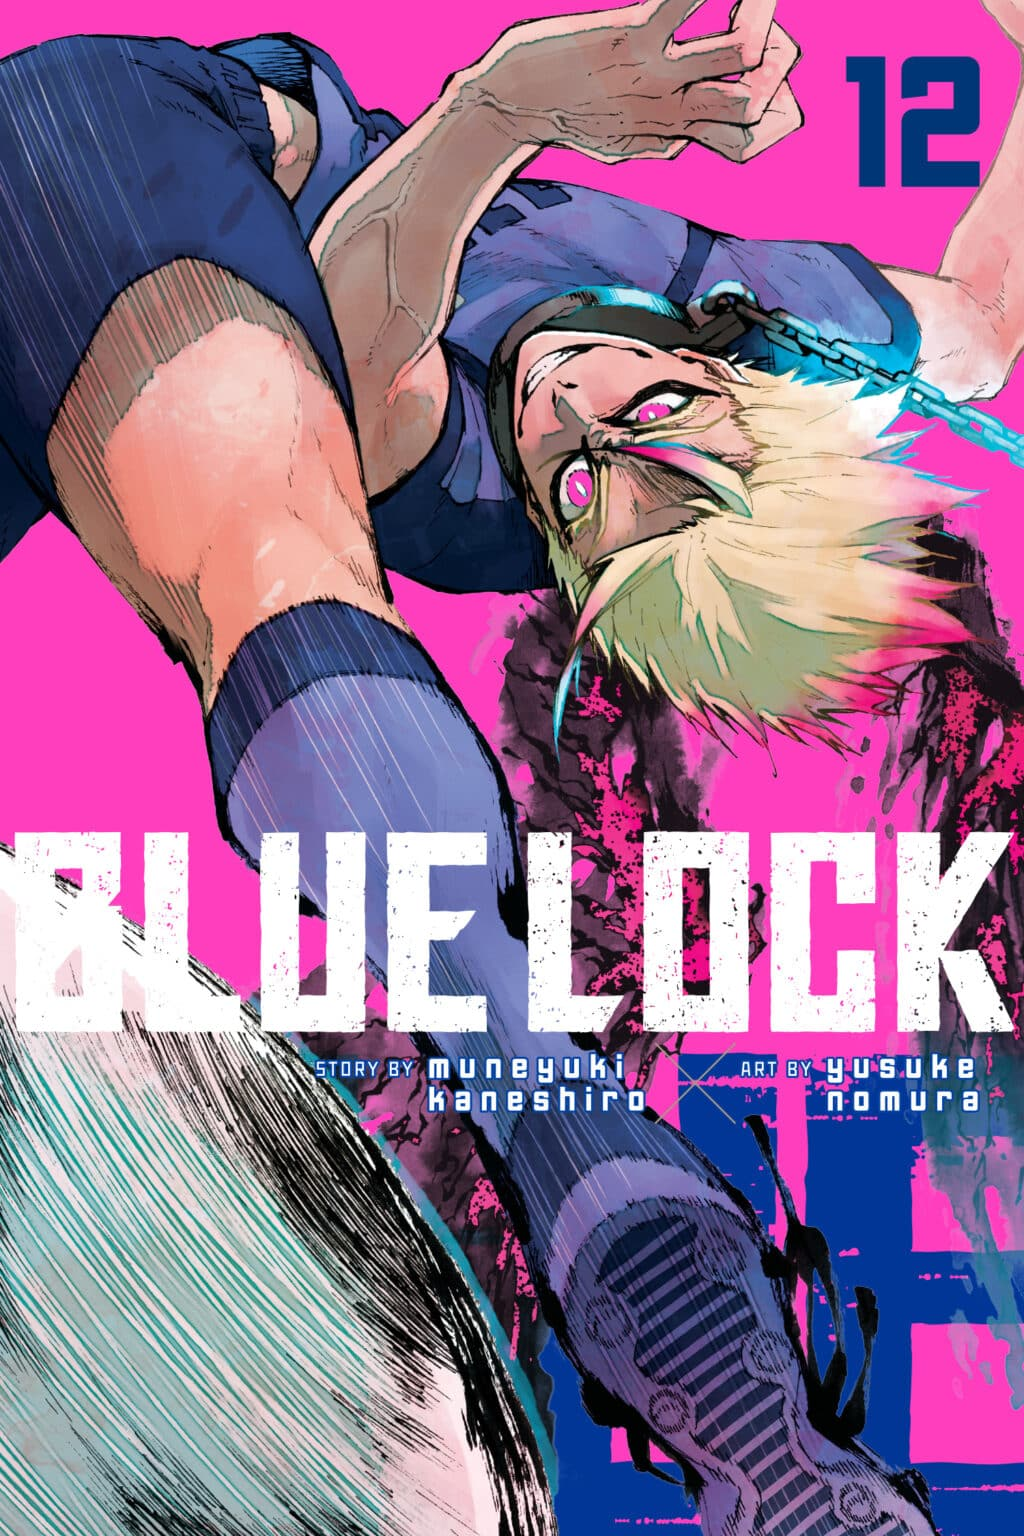 Blue Lock episode 12 release date, time and preview for mid-season finale